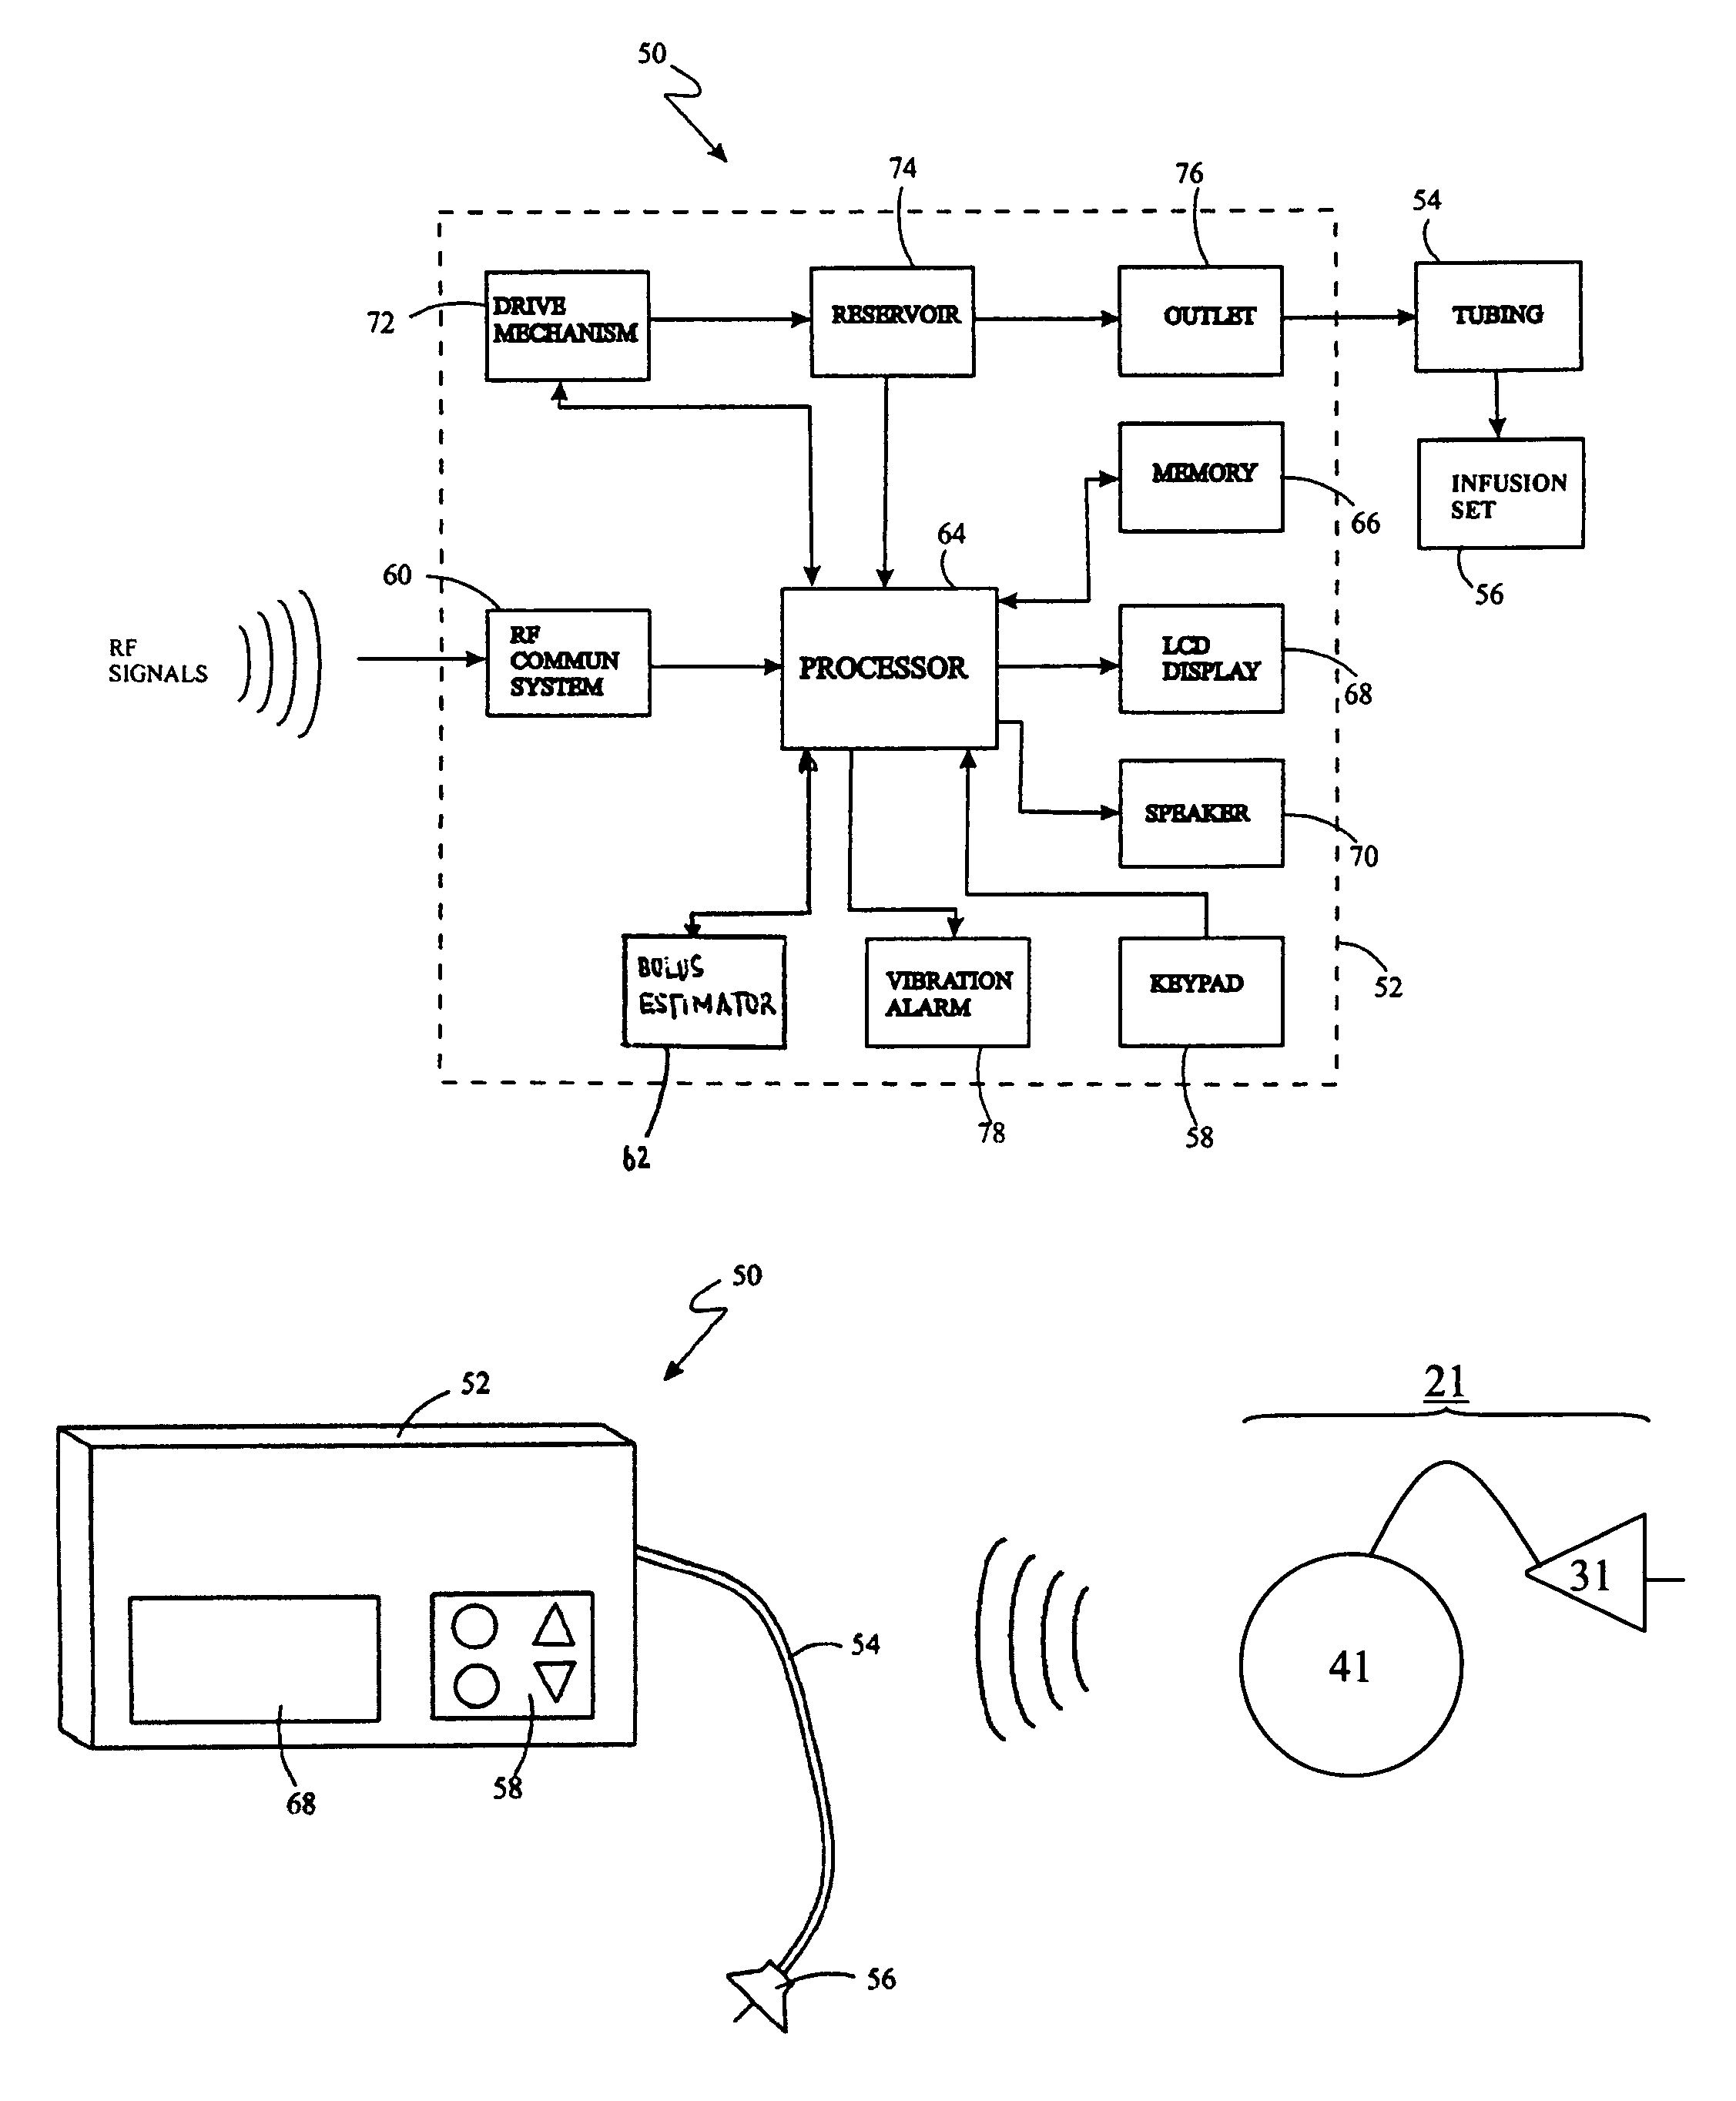 System for providing blood glucose measurements to an infusion device